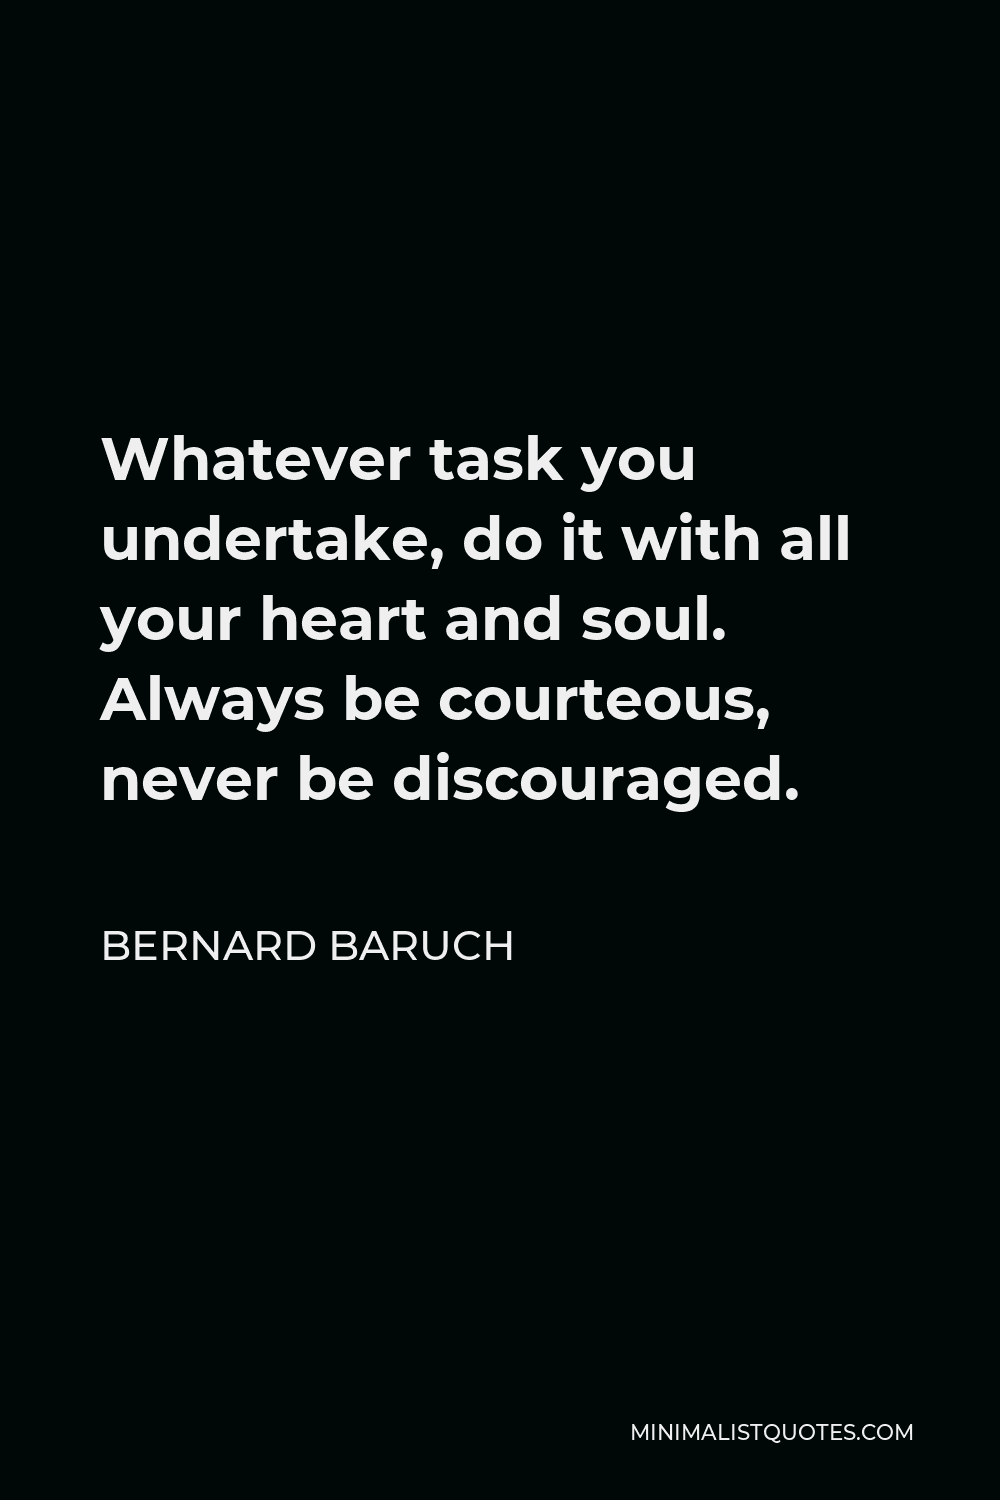 Bernard Baruch Quote - Whatever task you undertake, do it with all your heart and soul. Always be courteous, never be discouraged.